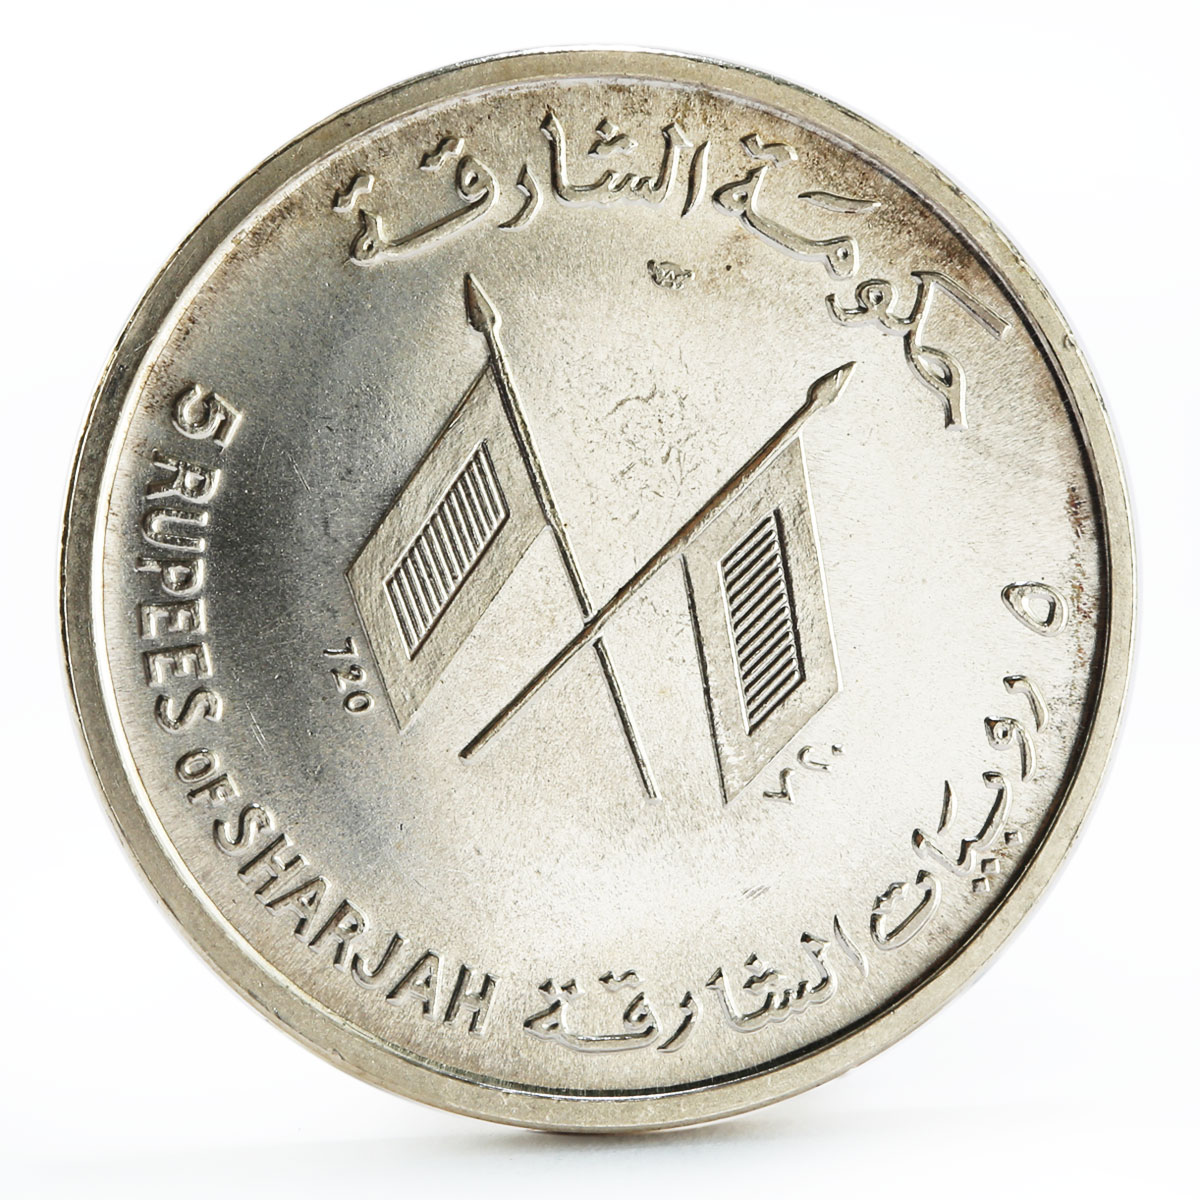 Sharjah 5 rupees Commemoration of John Kennedy proof silver coin 1964